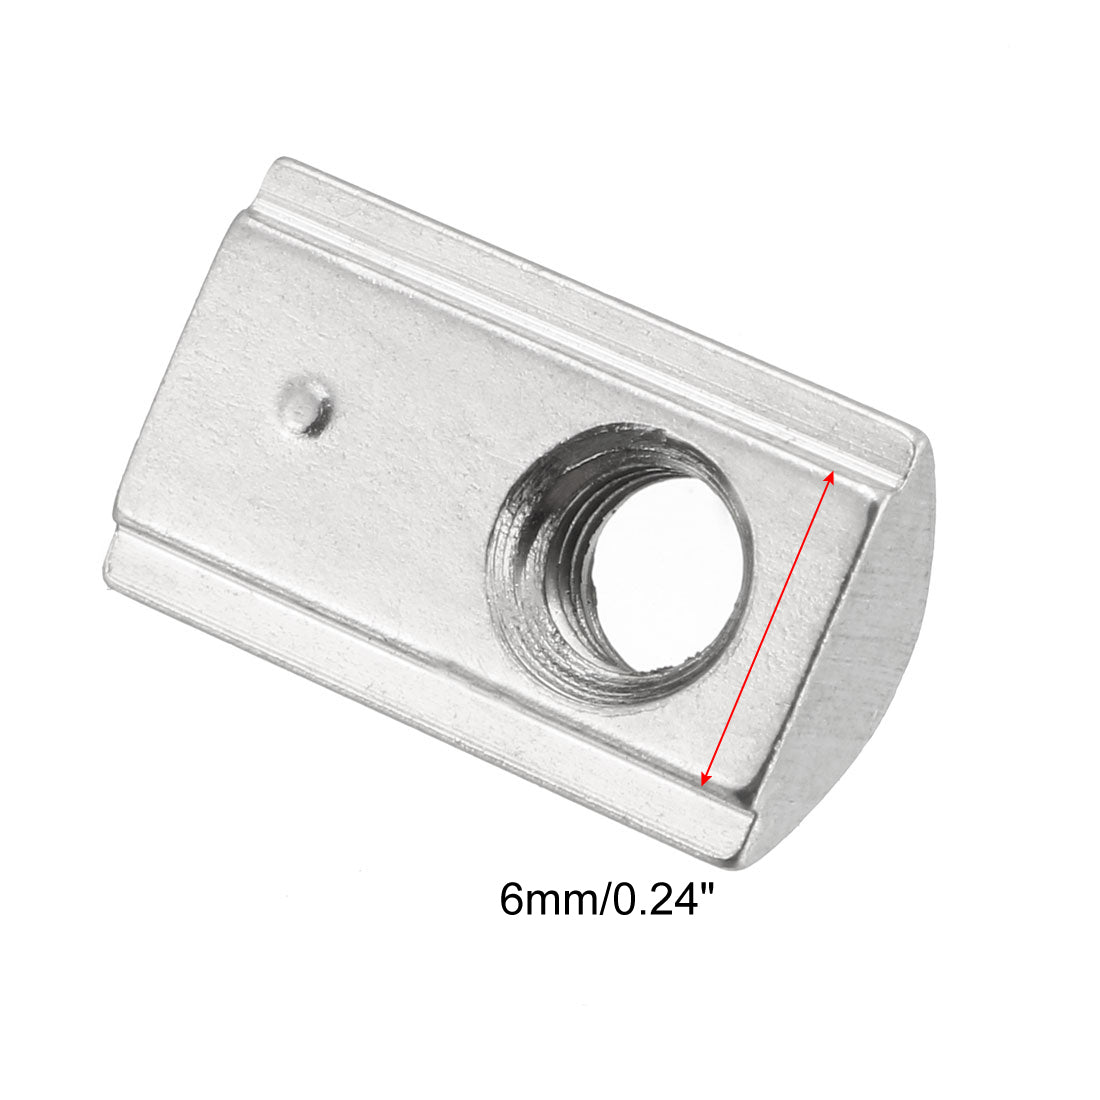 Uxcell Uxcell Roll-In Spring M4 T Nut 2020 Series Aluminum Extrusion, for 6mm T Slot 10 Pcs